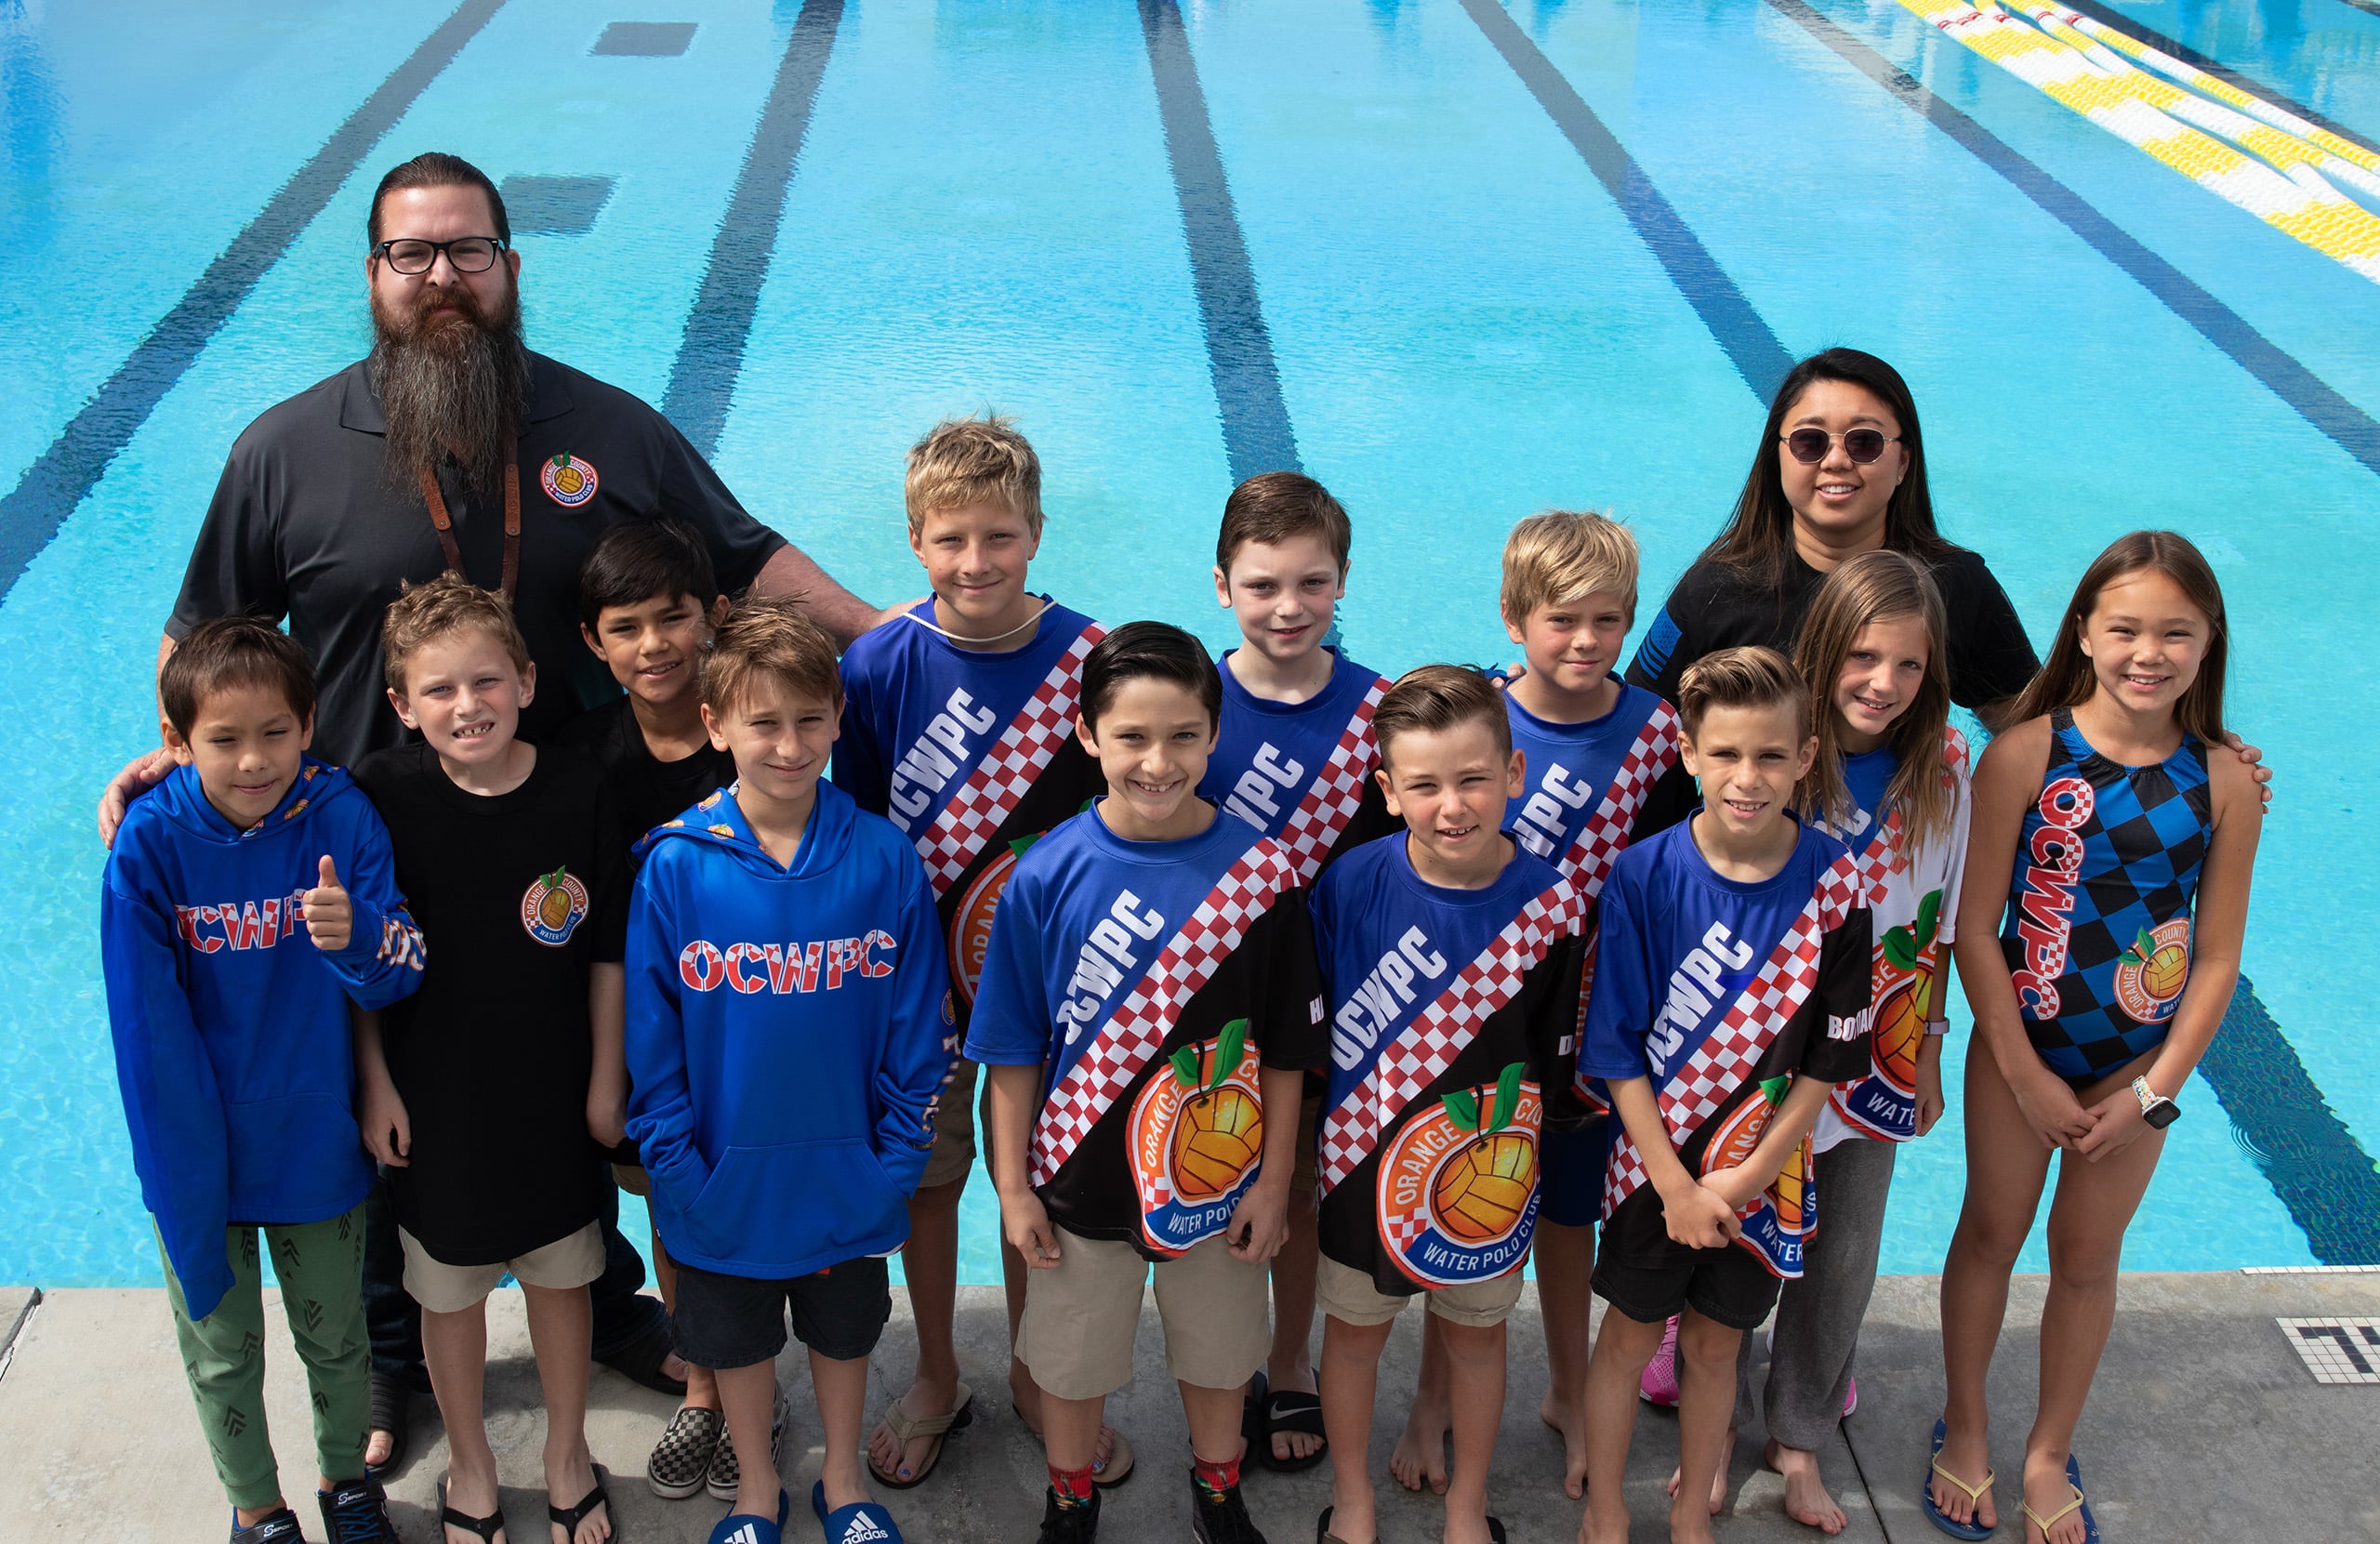 10 & under water polo in Orange County, CA